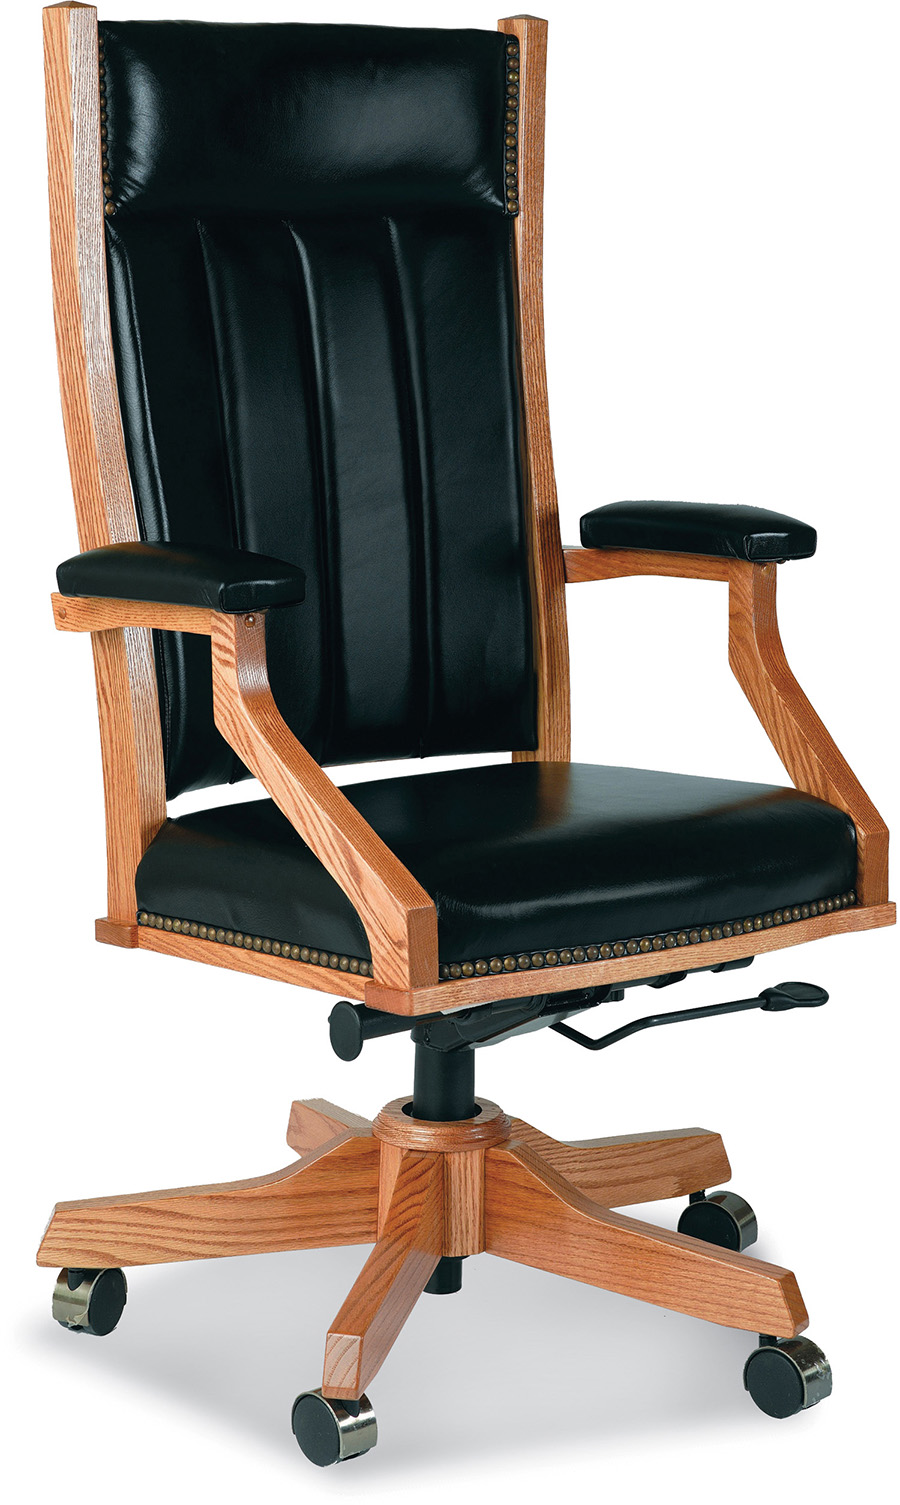 Mission Desk Chair In Office Buy Custom Amish Furniture